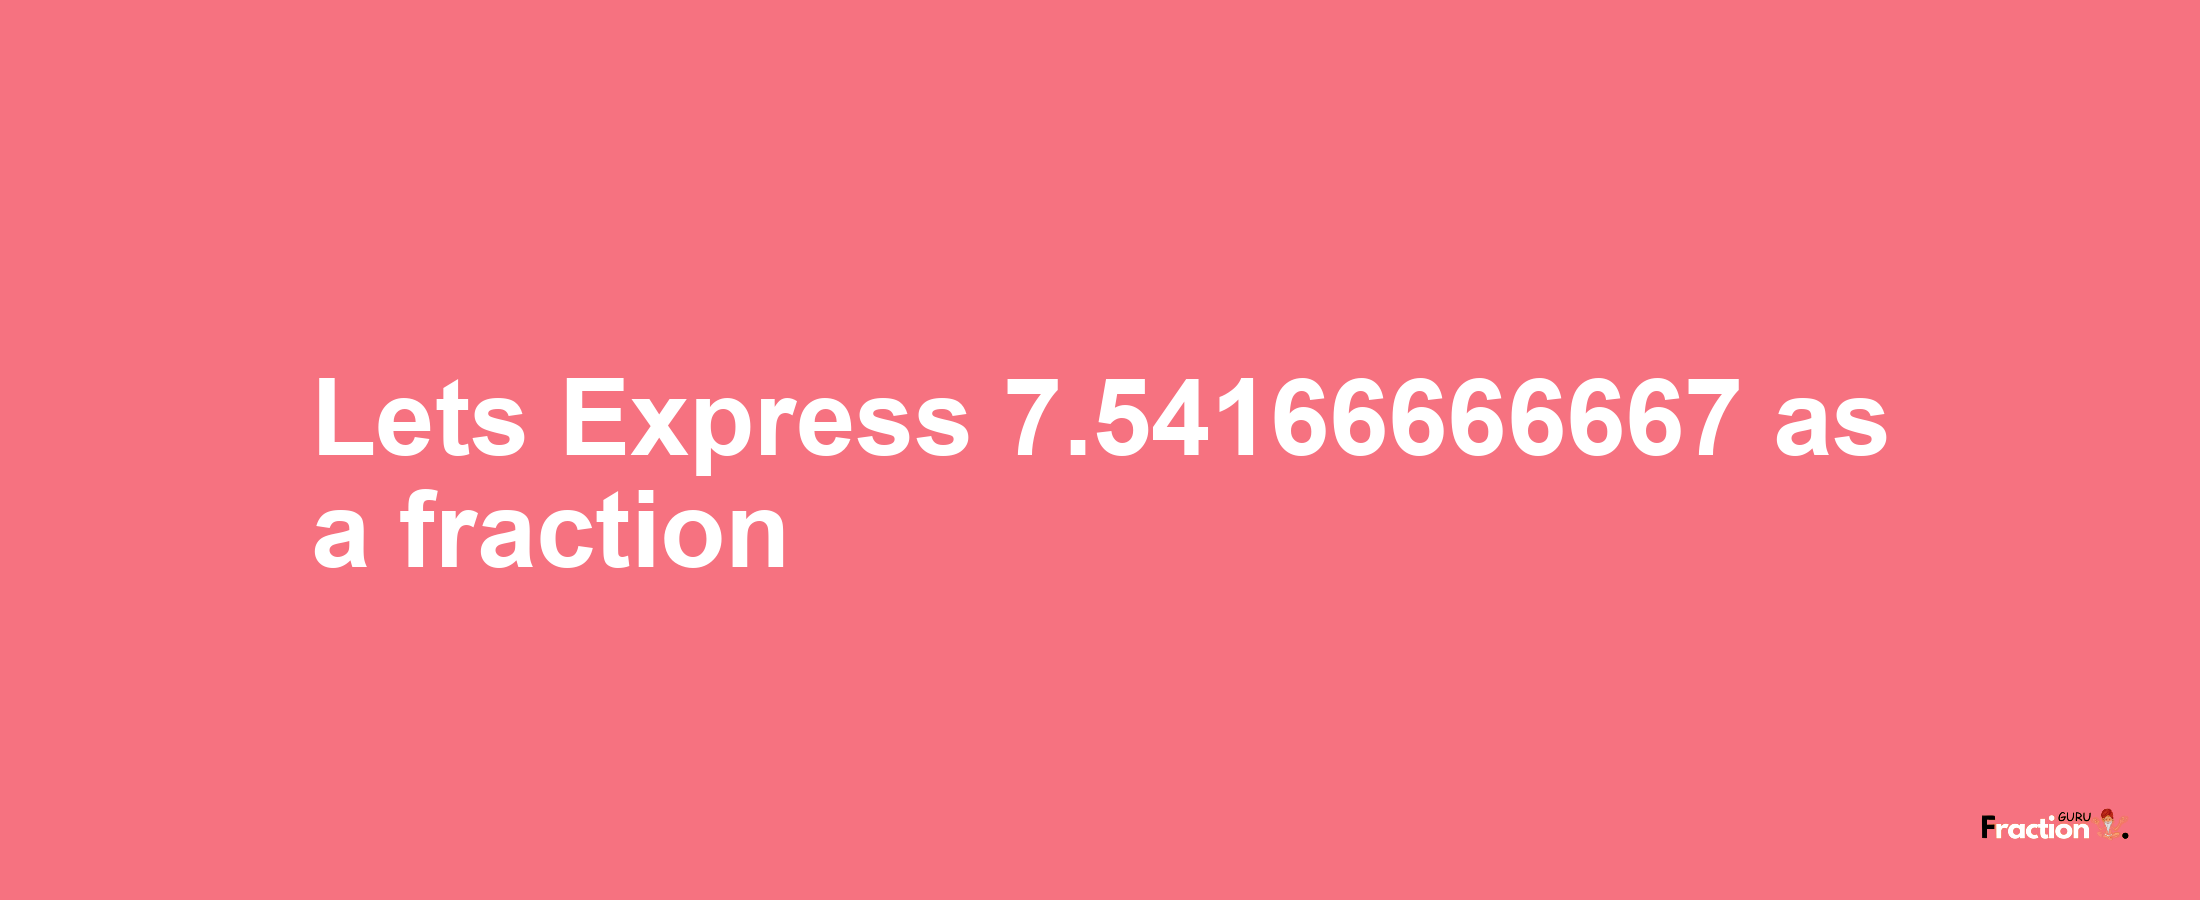 Lets Express 7.54166666667 as afraction